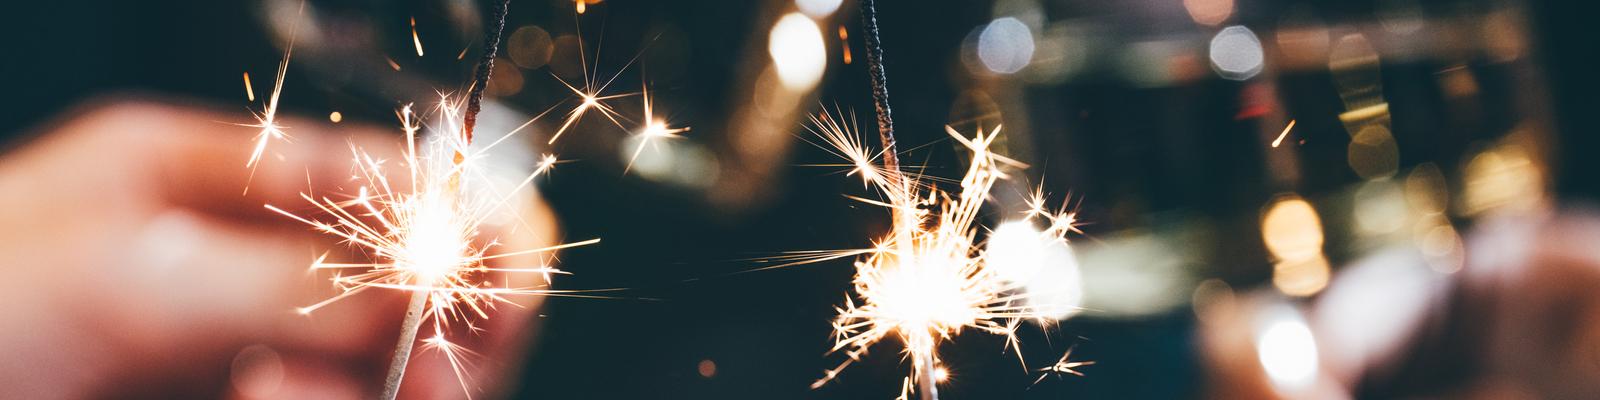 Close-up of human hands holding sparklers.